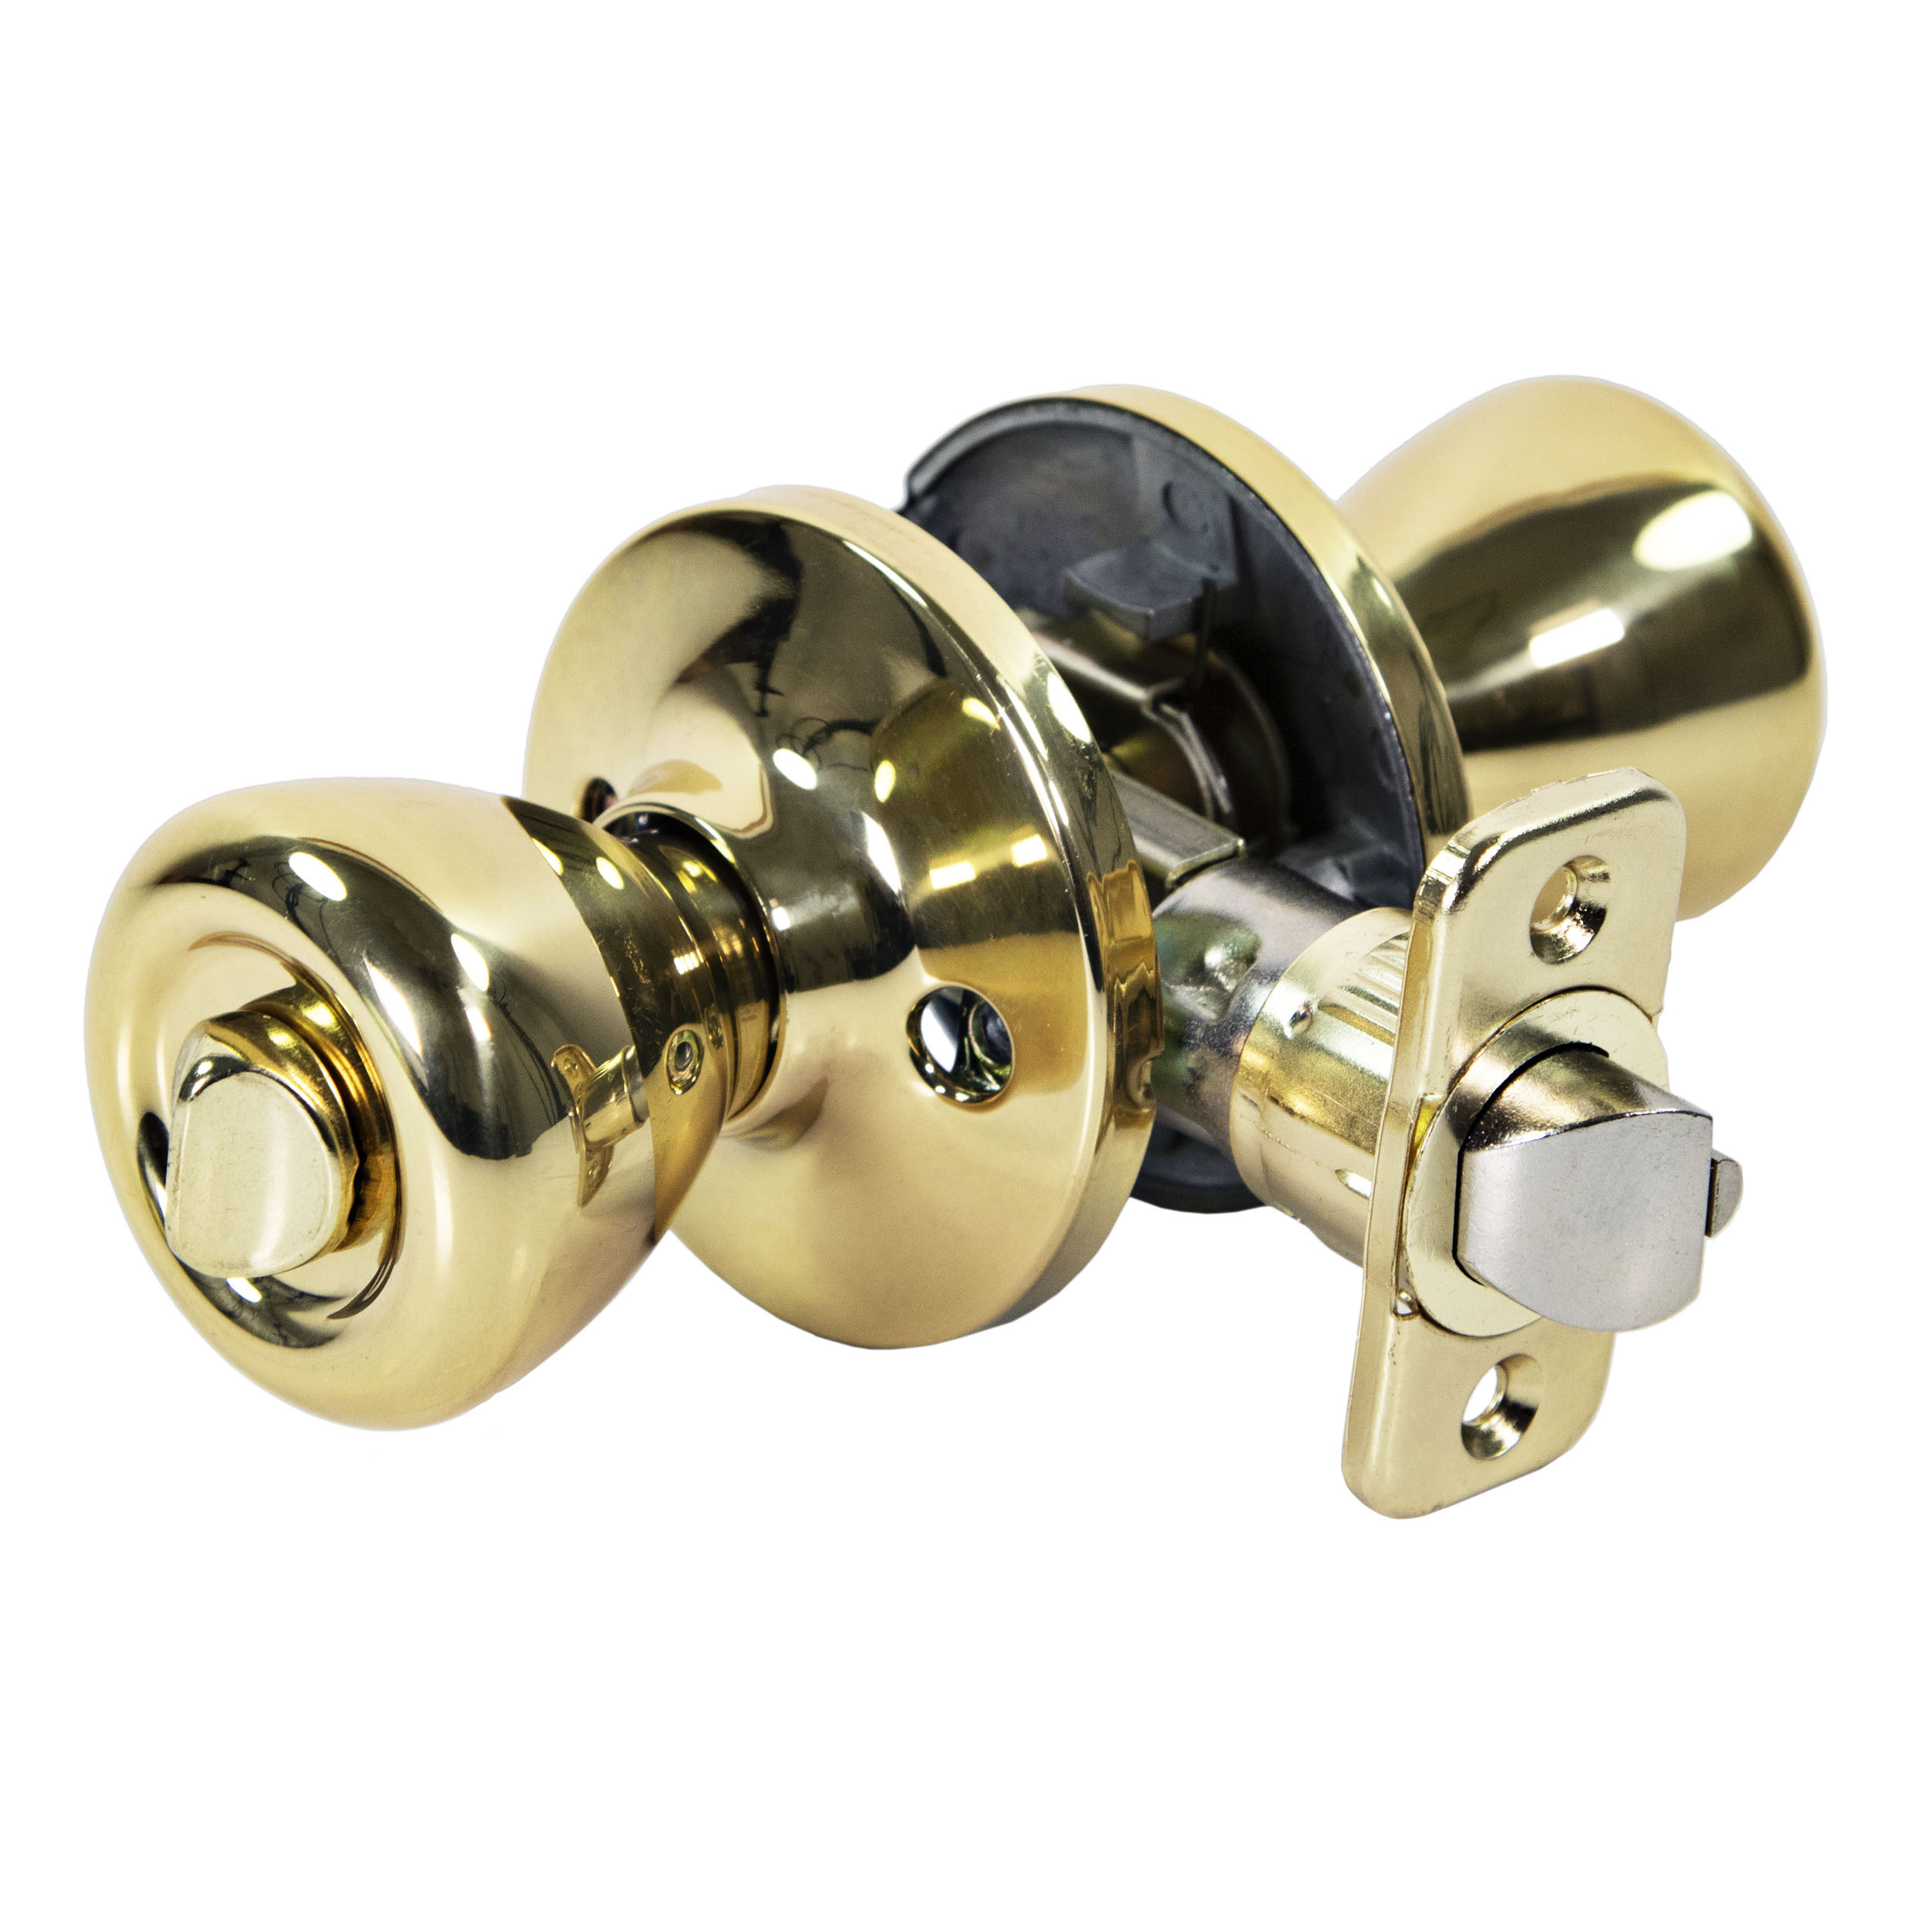 Ultra Security Rittenhouse Keyed Entry with Deadbolt Tulip Door Knob - Security Keyed Entry with Deadbolt Lockset, KW1 Keyed Entry, Fits 1-3/8" To 1-3/4" Thick Door (Polished Brass Finish, 1 Pack) - image 5 of 10